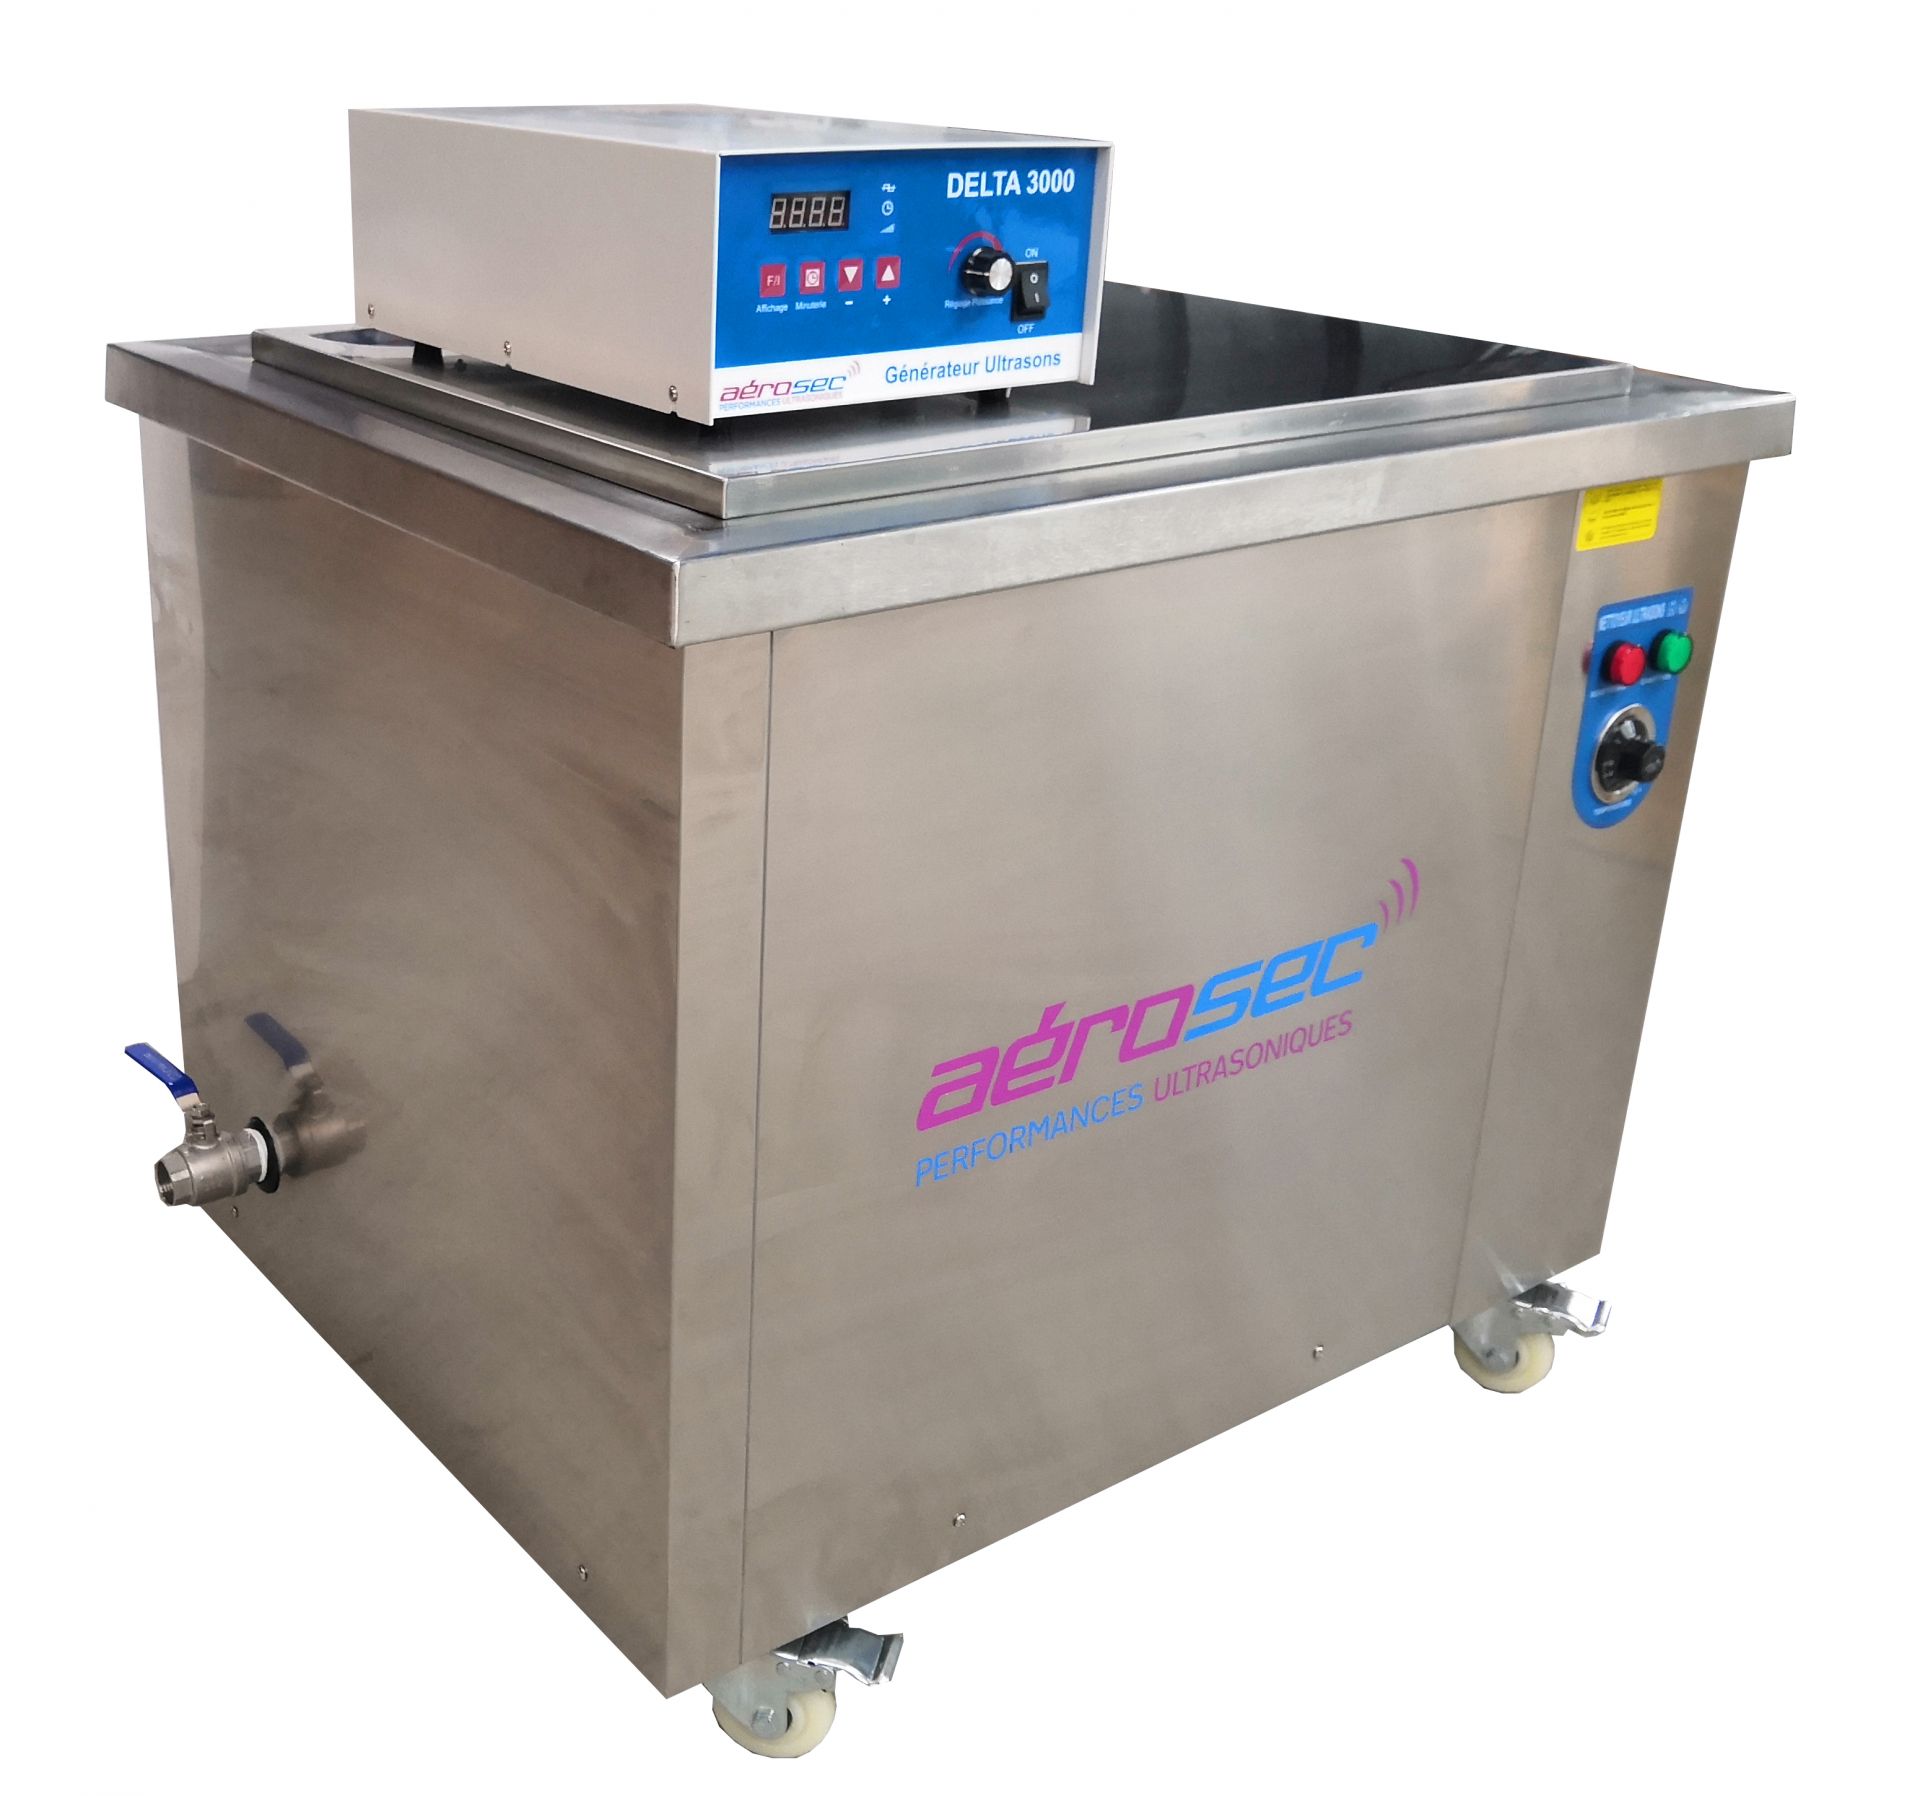 Cuve ultrasons 265 litres - usage non intensif - delta eco industrie_0